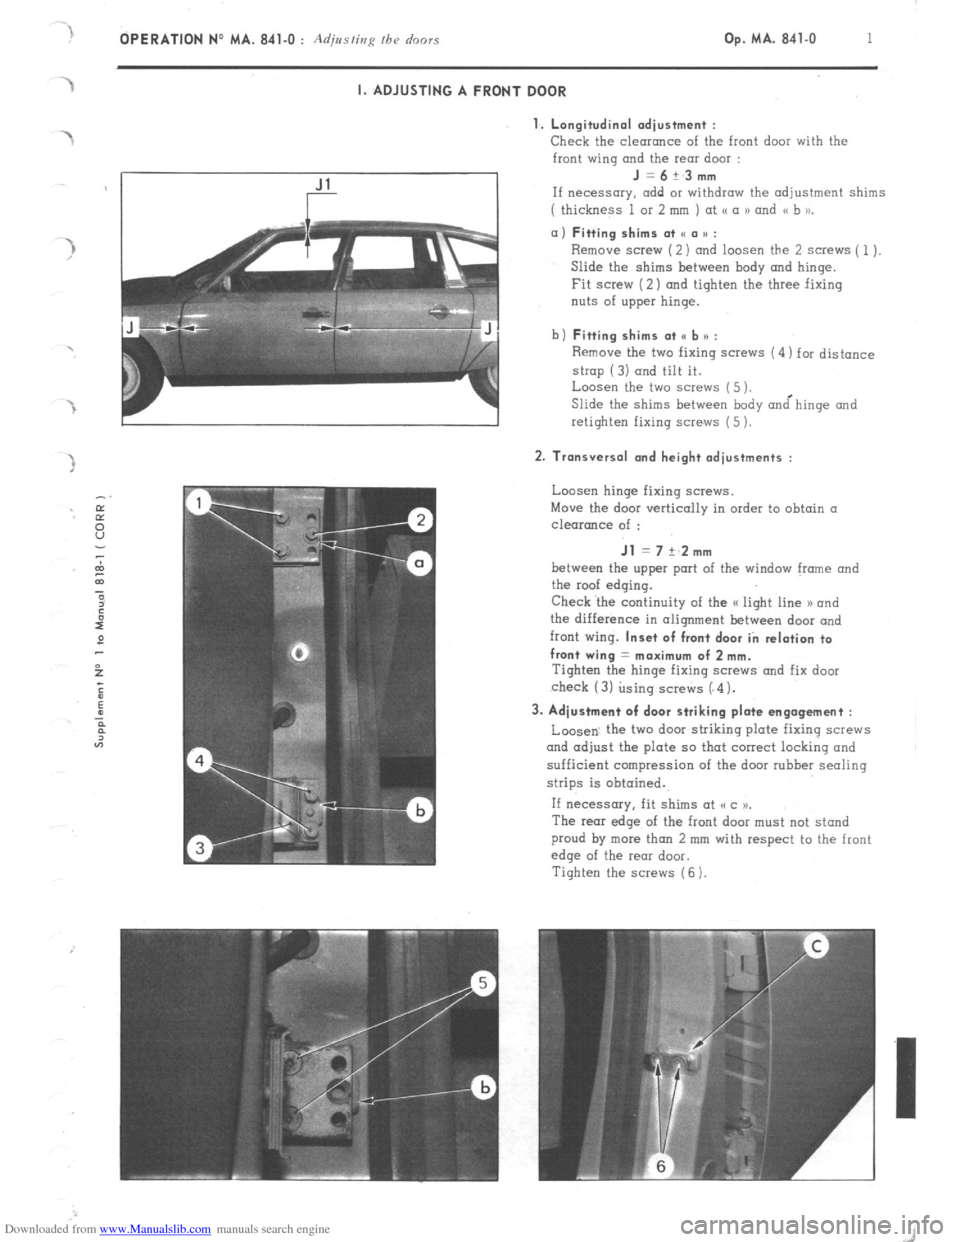 Citroen CX 1985 1.G Workshop Manual Downloaded from www.Manualslib.com manuals search engine OPERATION No MA. 841-O : Adjusting fh~ doors Op. MA. 841-O 1 I. ADJUSTING A FRONT DOOR 
1. Longitudinal adiustment : 
Check 
the clearance of t